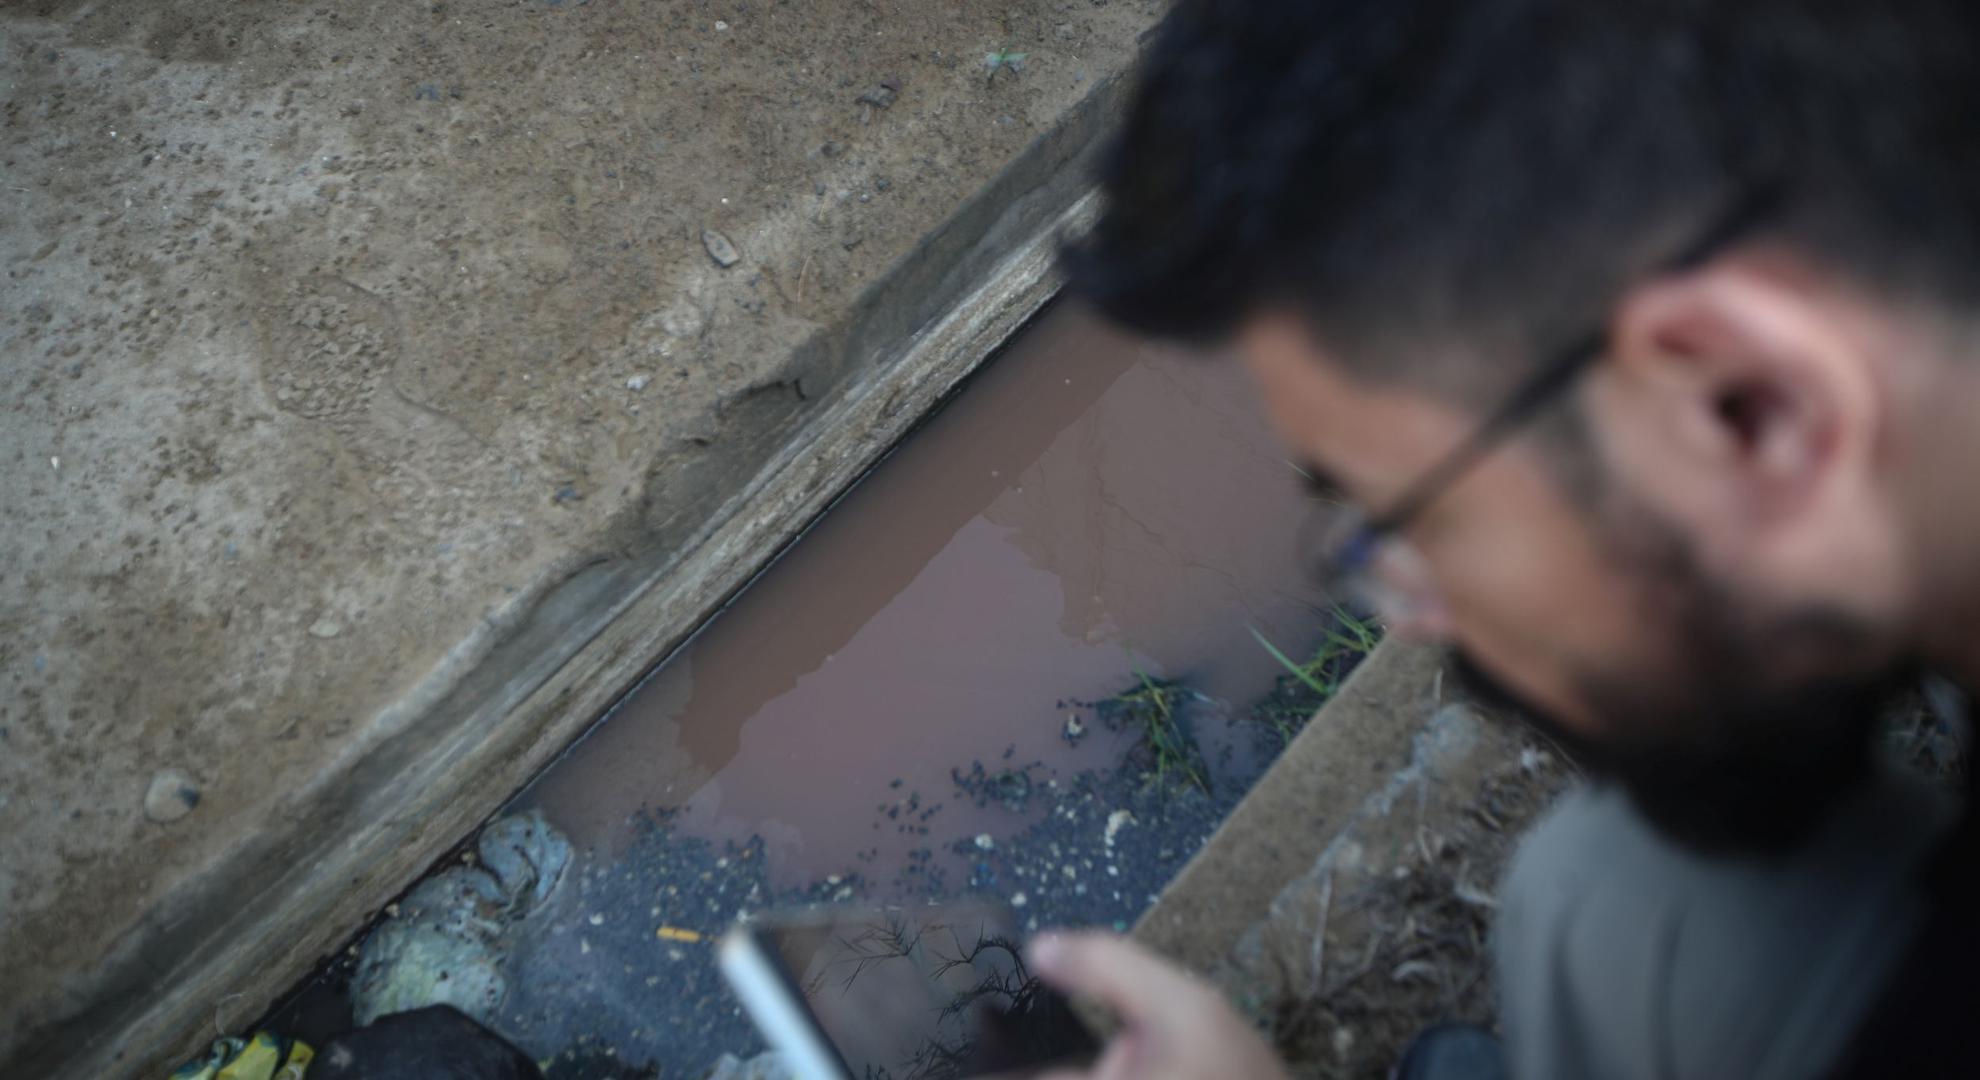 During its arrival, the newspaper saw red and dark water entering space through a canal.  According to the OAS, this is “due to the death of microorganisms responsible for purifying wastewater. […] Where the red water comes from indicates inadequate maintenance of the treatment plant.